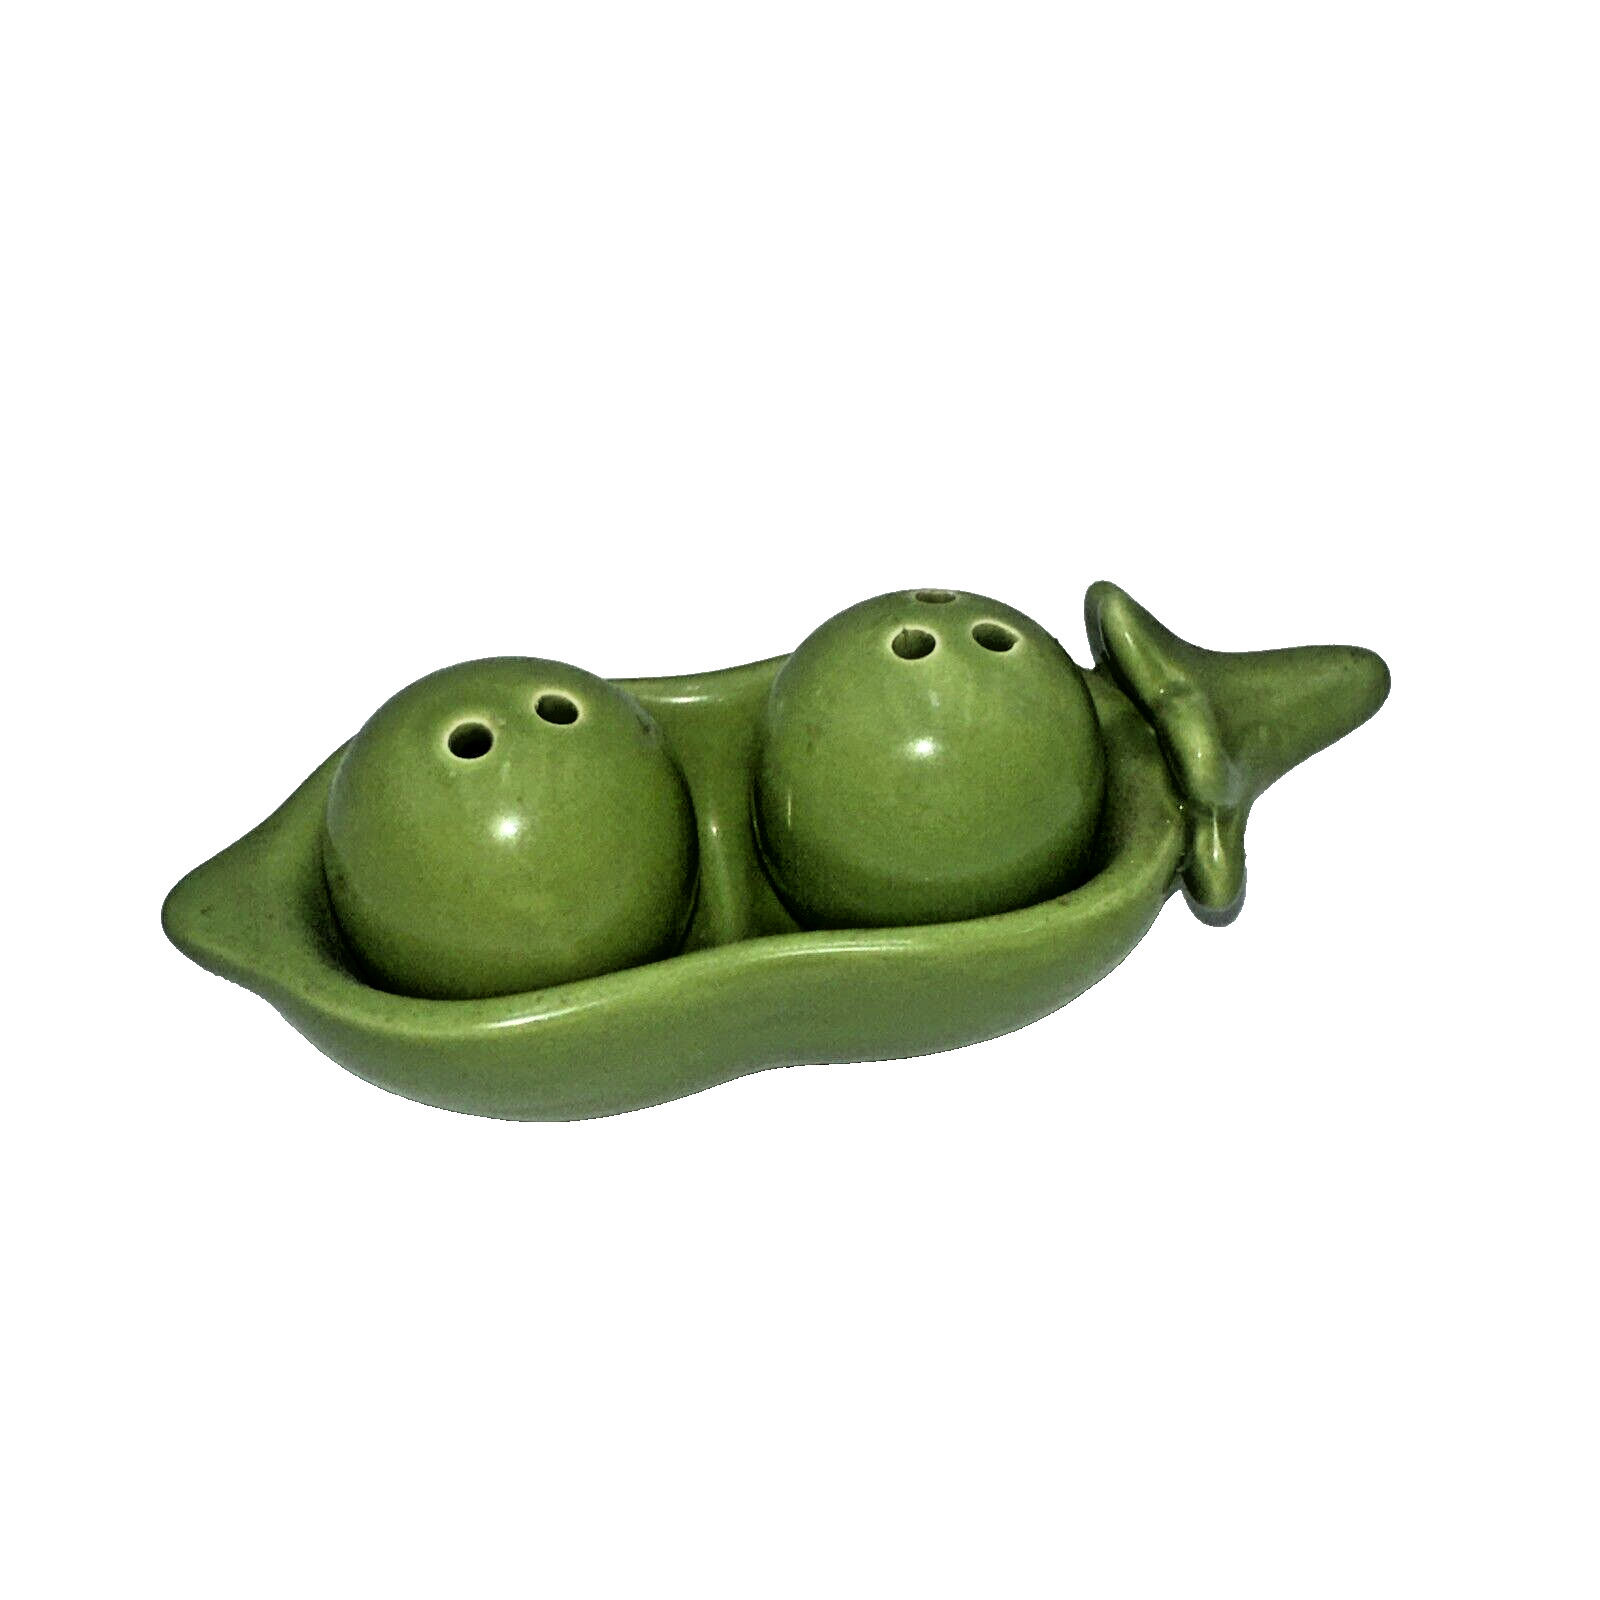 Pier 1 Imports “2 PEAS IN A POD” Salt & Pepper Shakers 4” Valentines Day Gift